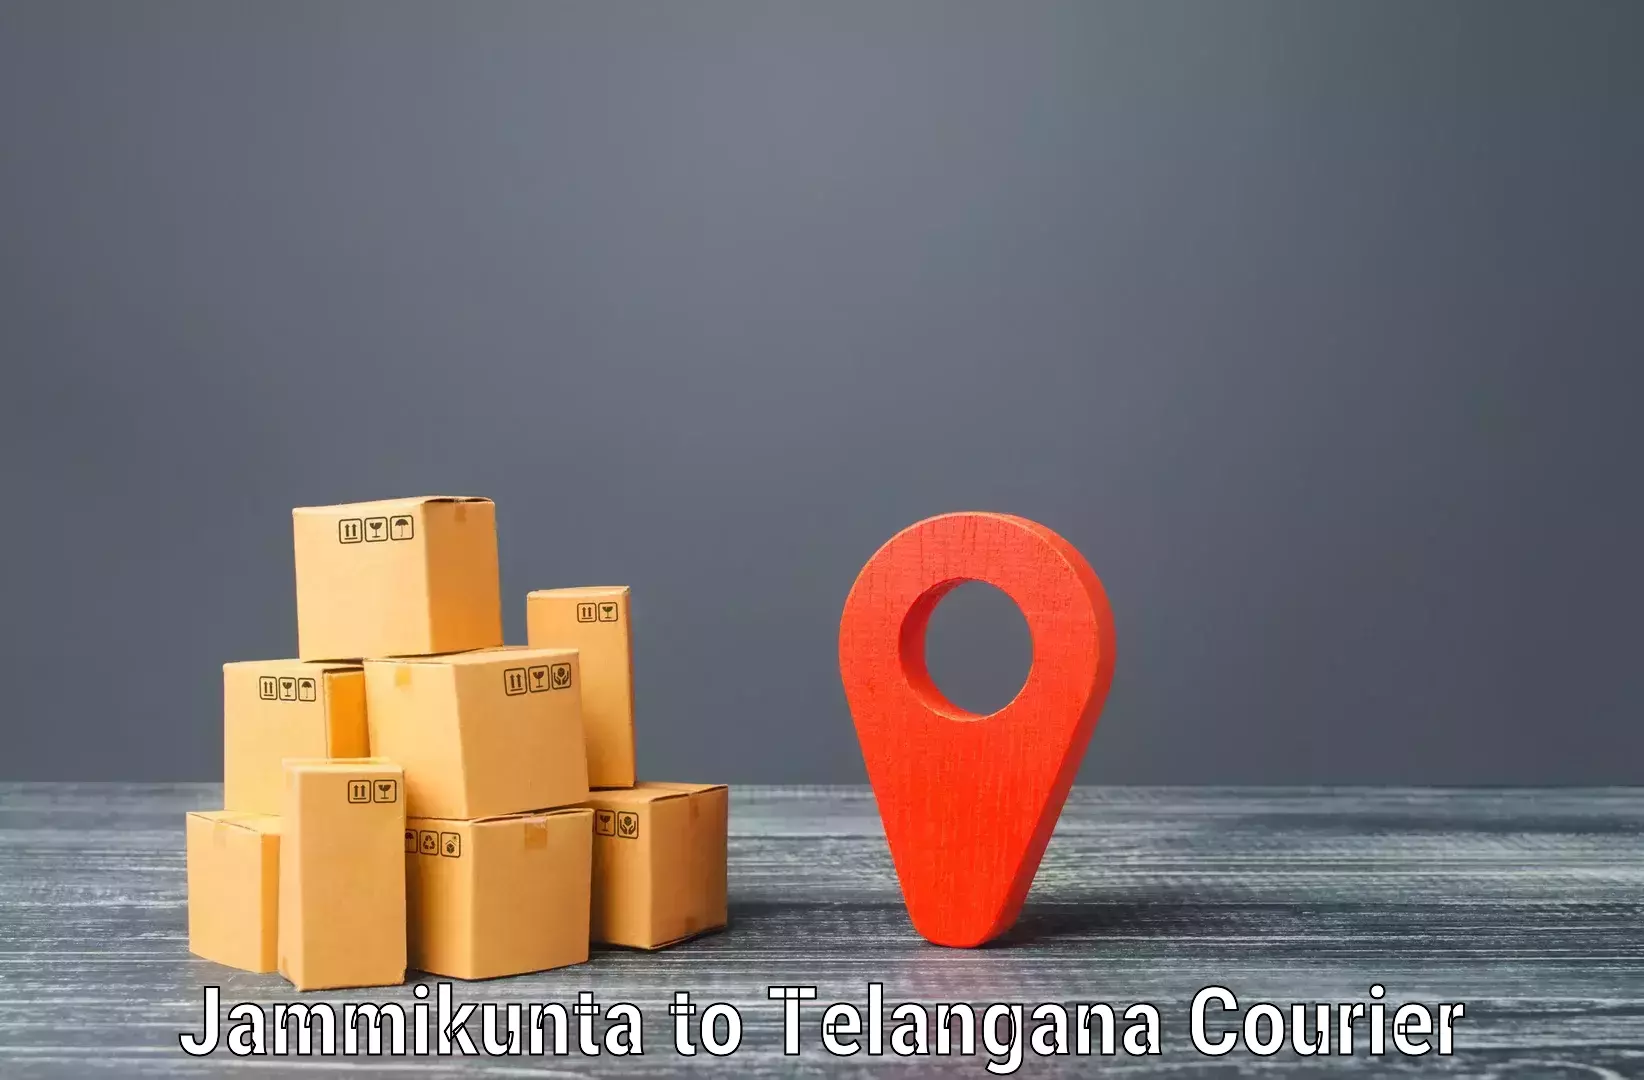 Tailored delivery services Jammikunta to Gangadhara